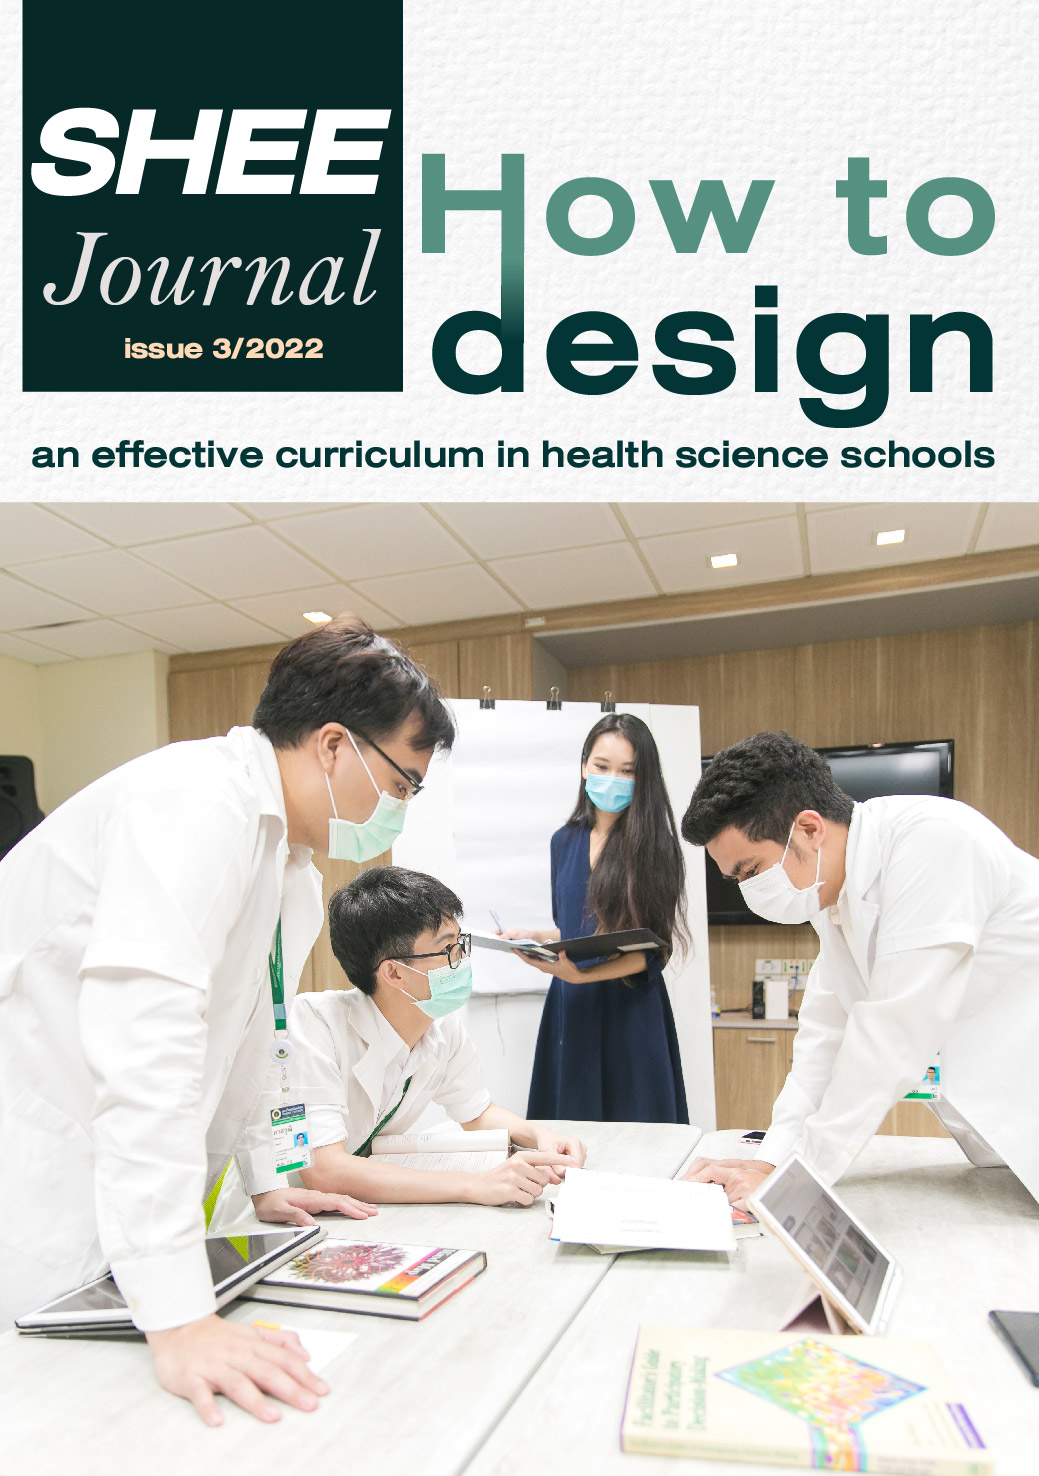 Journal Issue 3, 2022 เรื่อง How to design an effective curriculum in health science schools